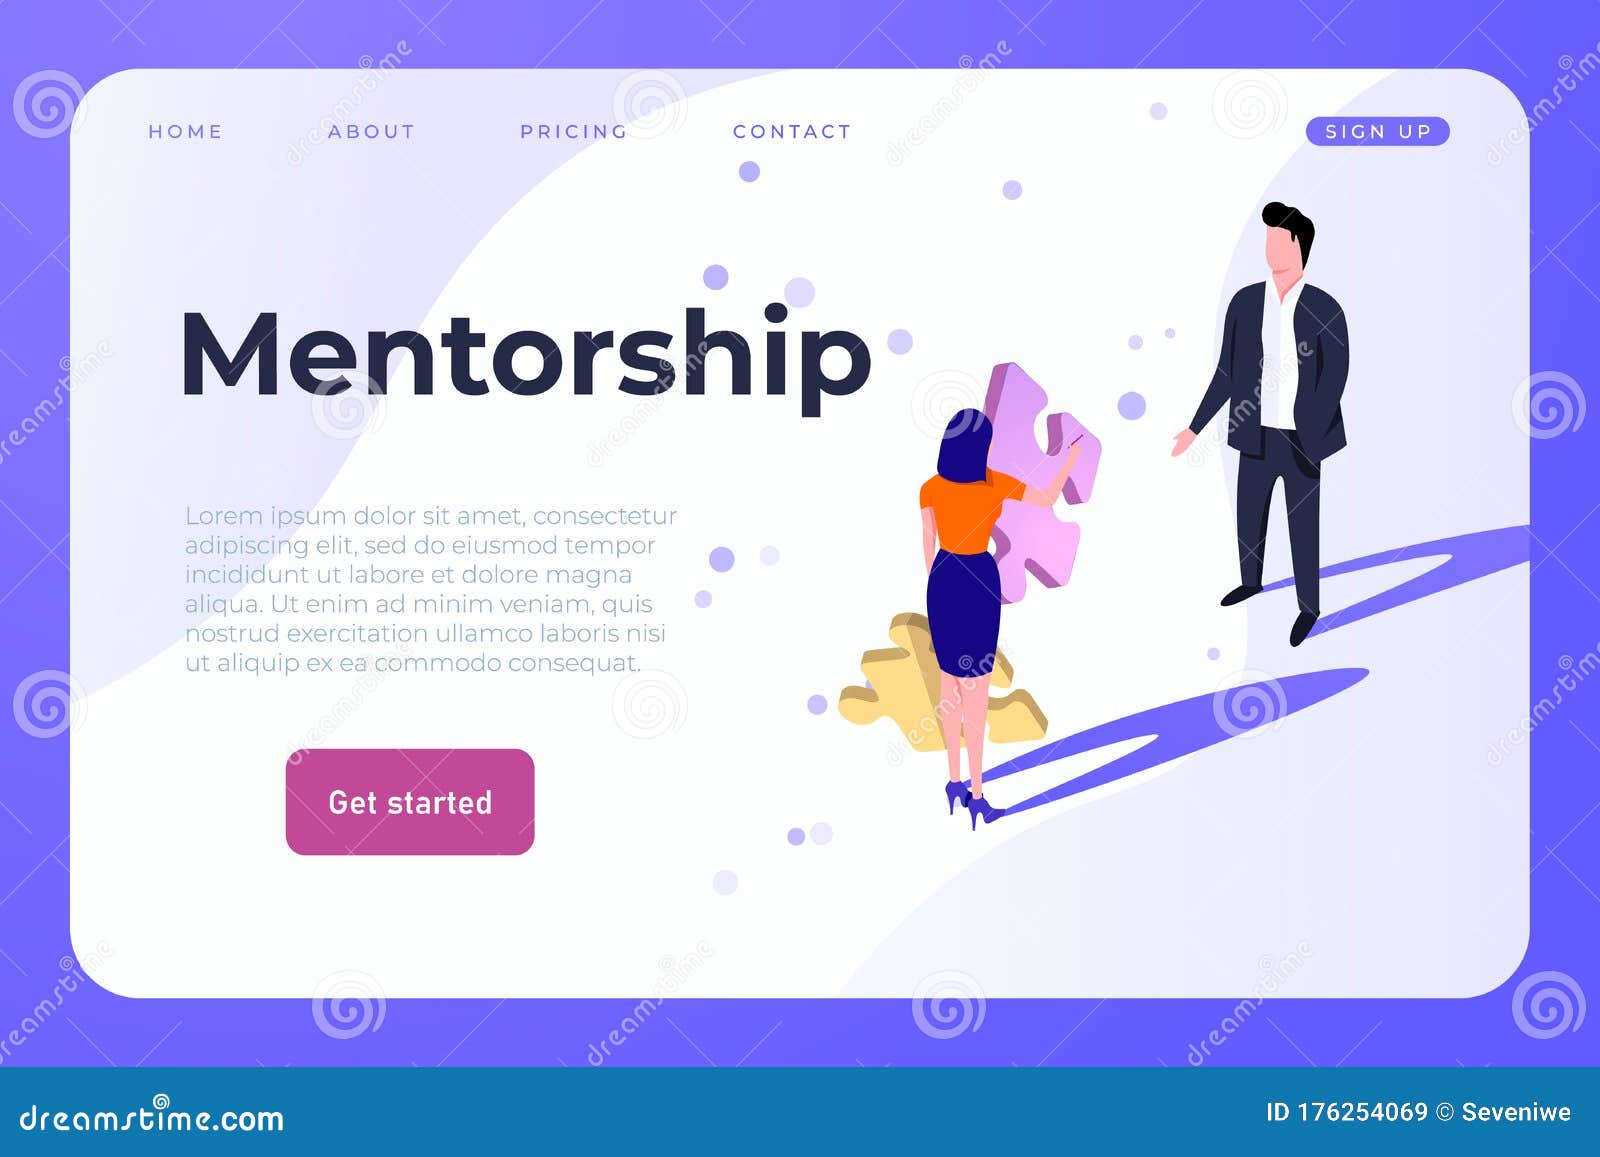 Mentorship Landing Web Page Template with Mentor and His Student Stock Vector - Illustration landing, education: 176254069